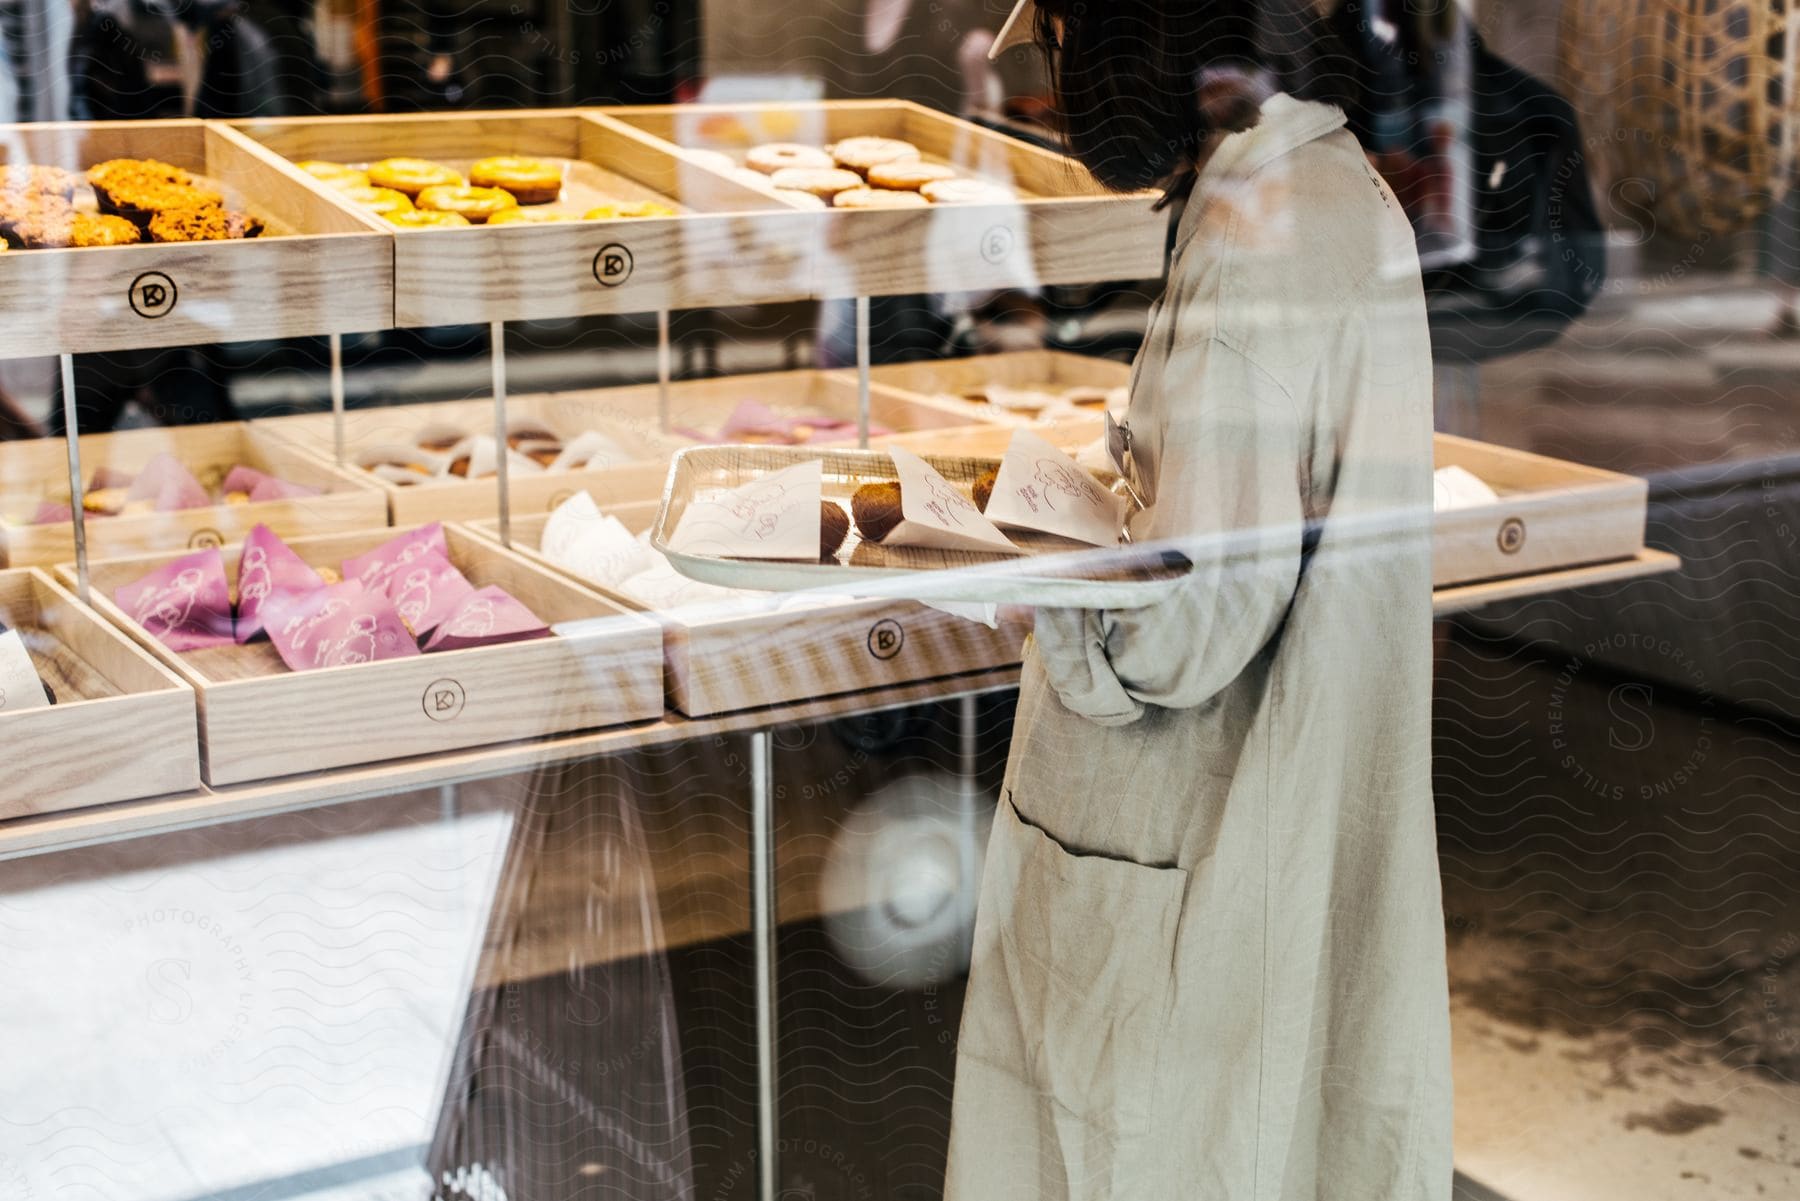 A customer in a trench coat picks out baked goods in a bakery.